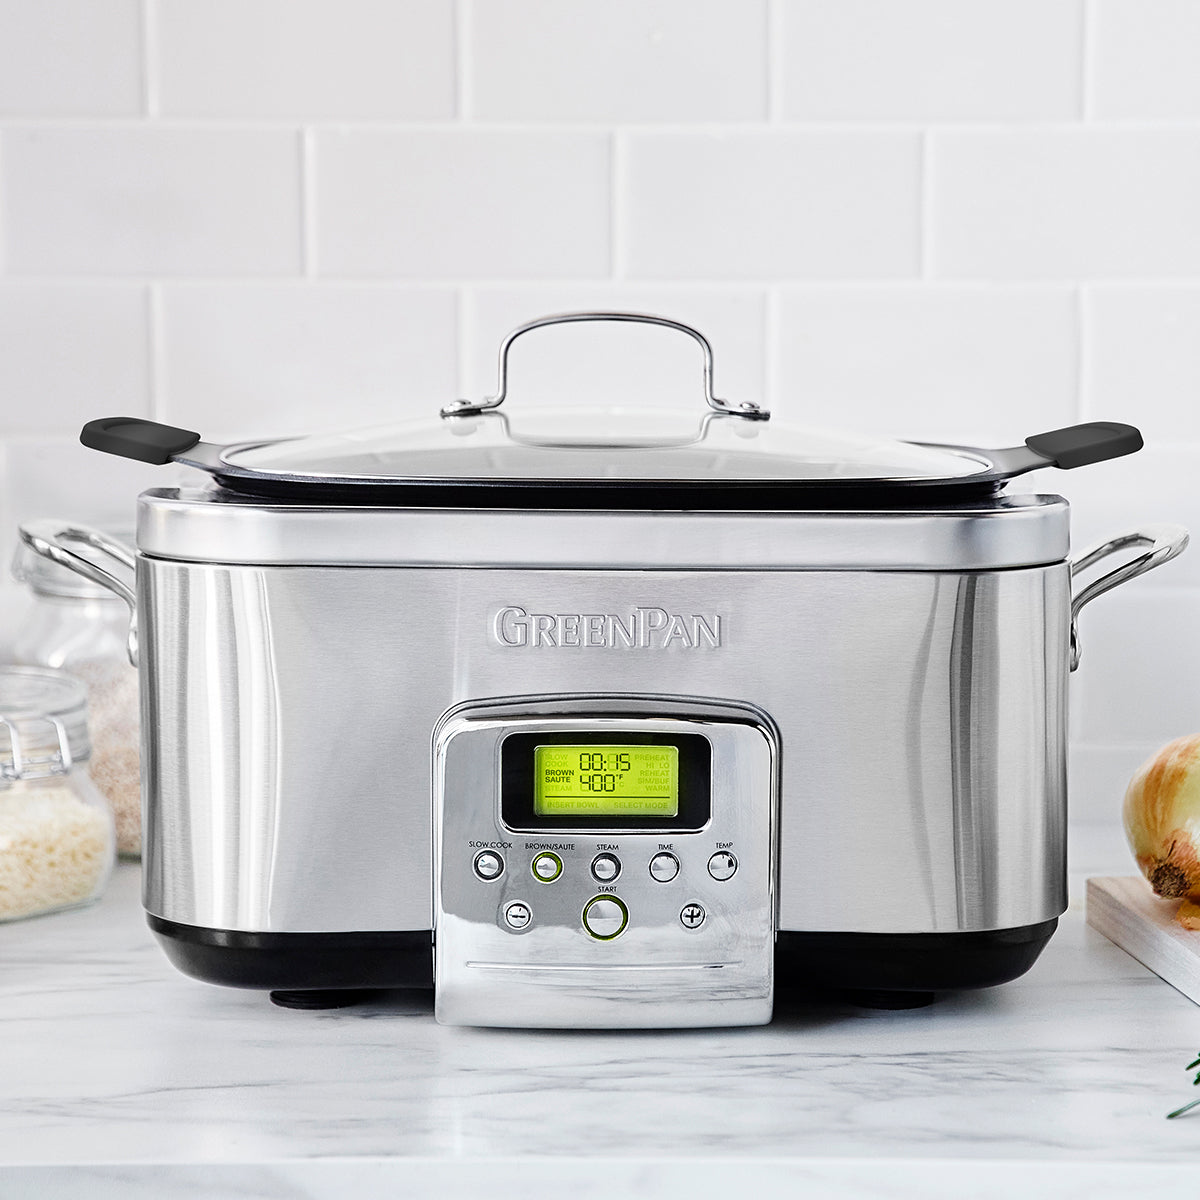  Crock-Pot 8 Quart 15 Multi Function Programmable Express Crock  Pressure Cooker for Slow and Pressure Cooking, Browning, Saute, or  Steaming, Steel: Home & Kitchen